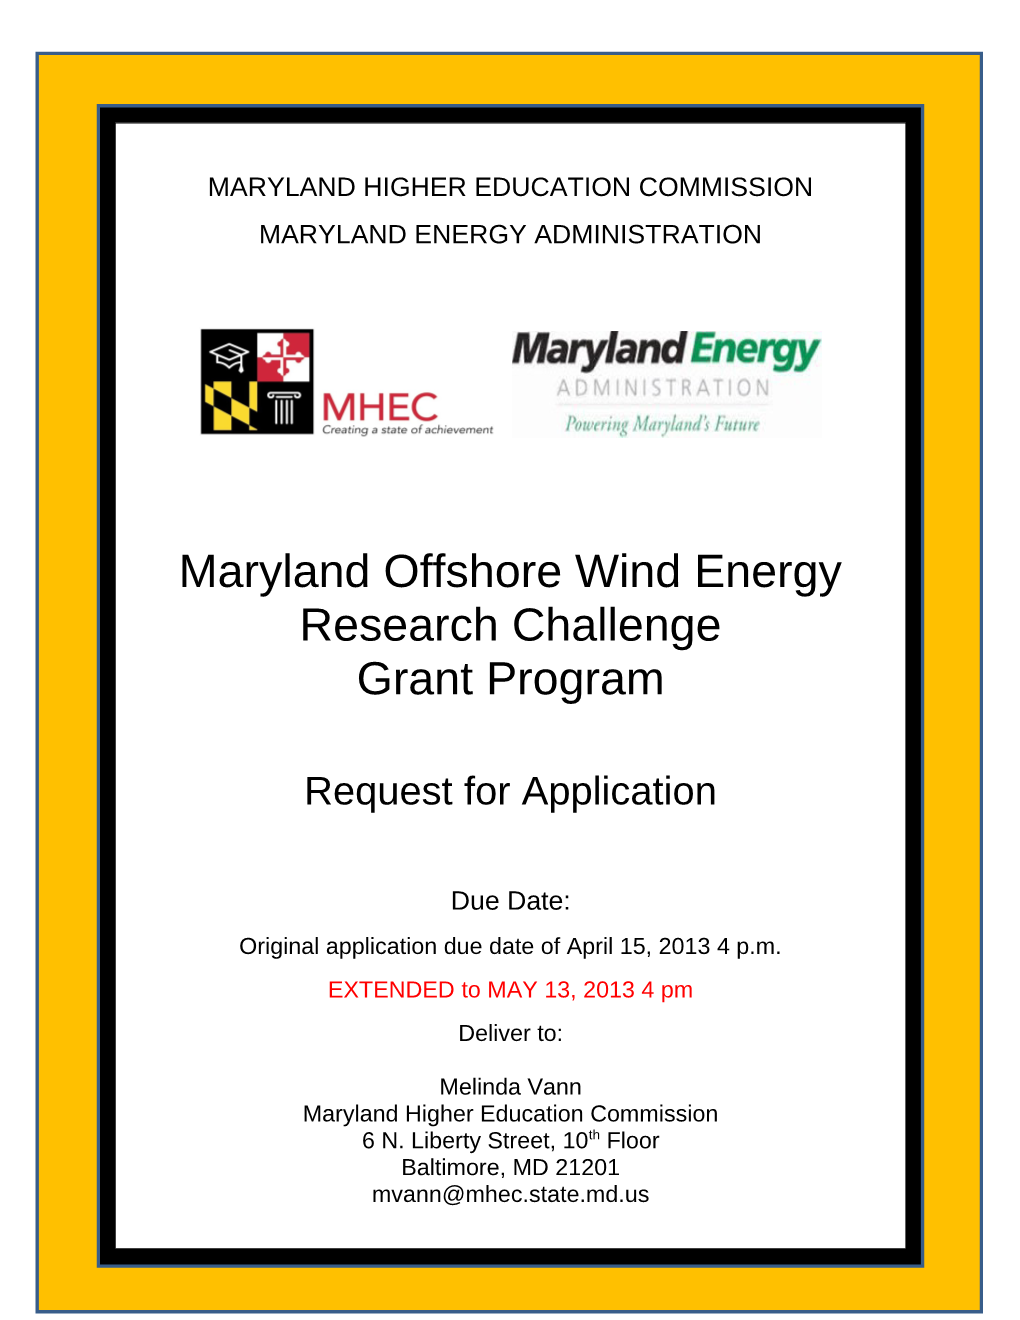 FY 2013 Maryland Offshore Wind Energy Research Challenge Grant Program